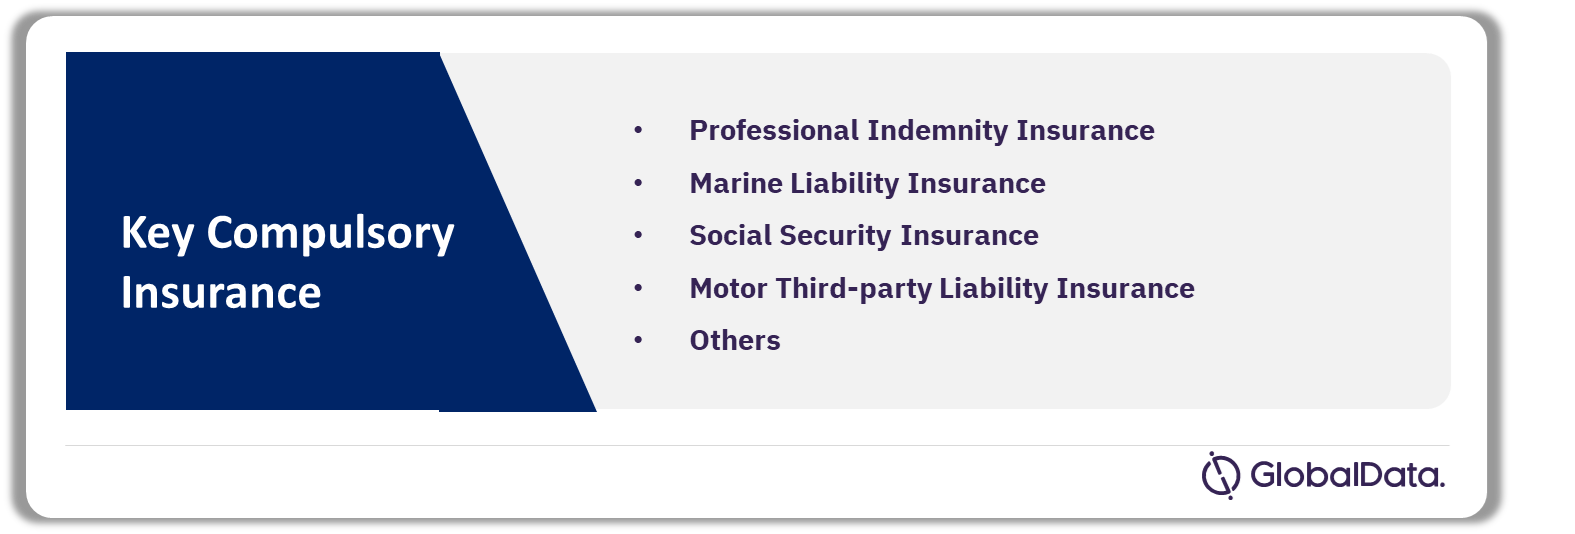 Gambia Insurance Industry Analysis by Compulsory Insurances